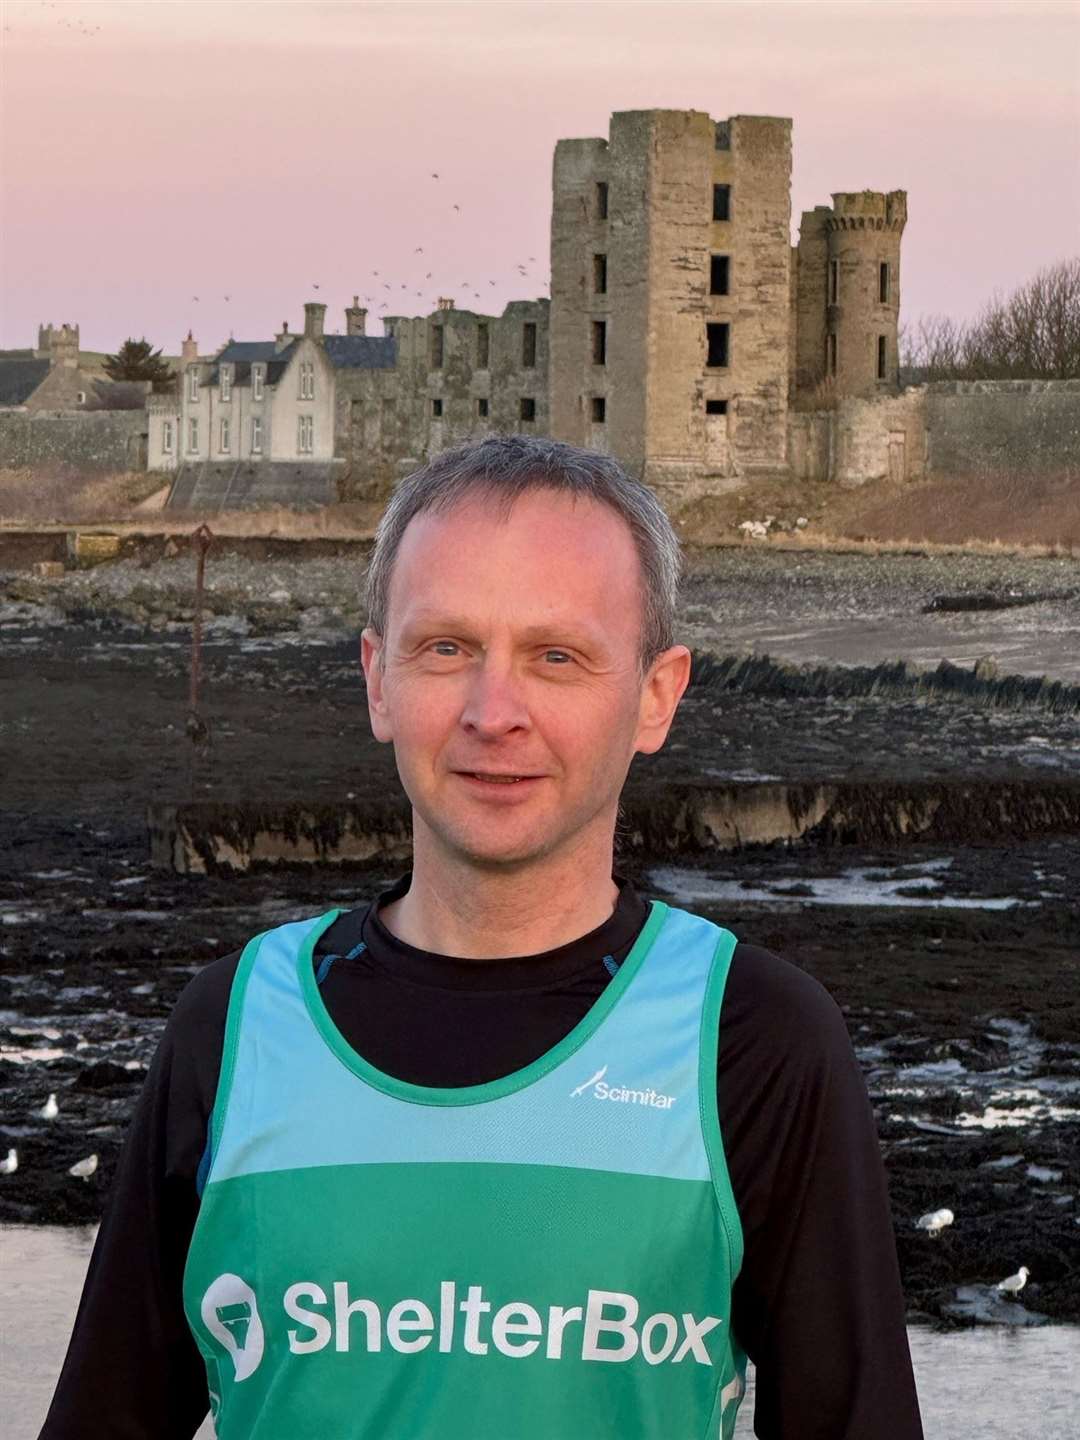 Derek Sinclair is taking on a Trilogy of Hope – running three marathons to raise funds for disaster relief charity ShelterBox.